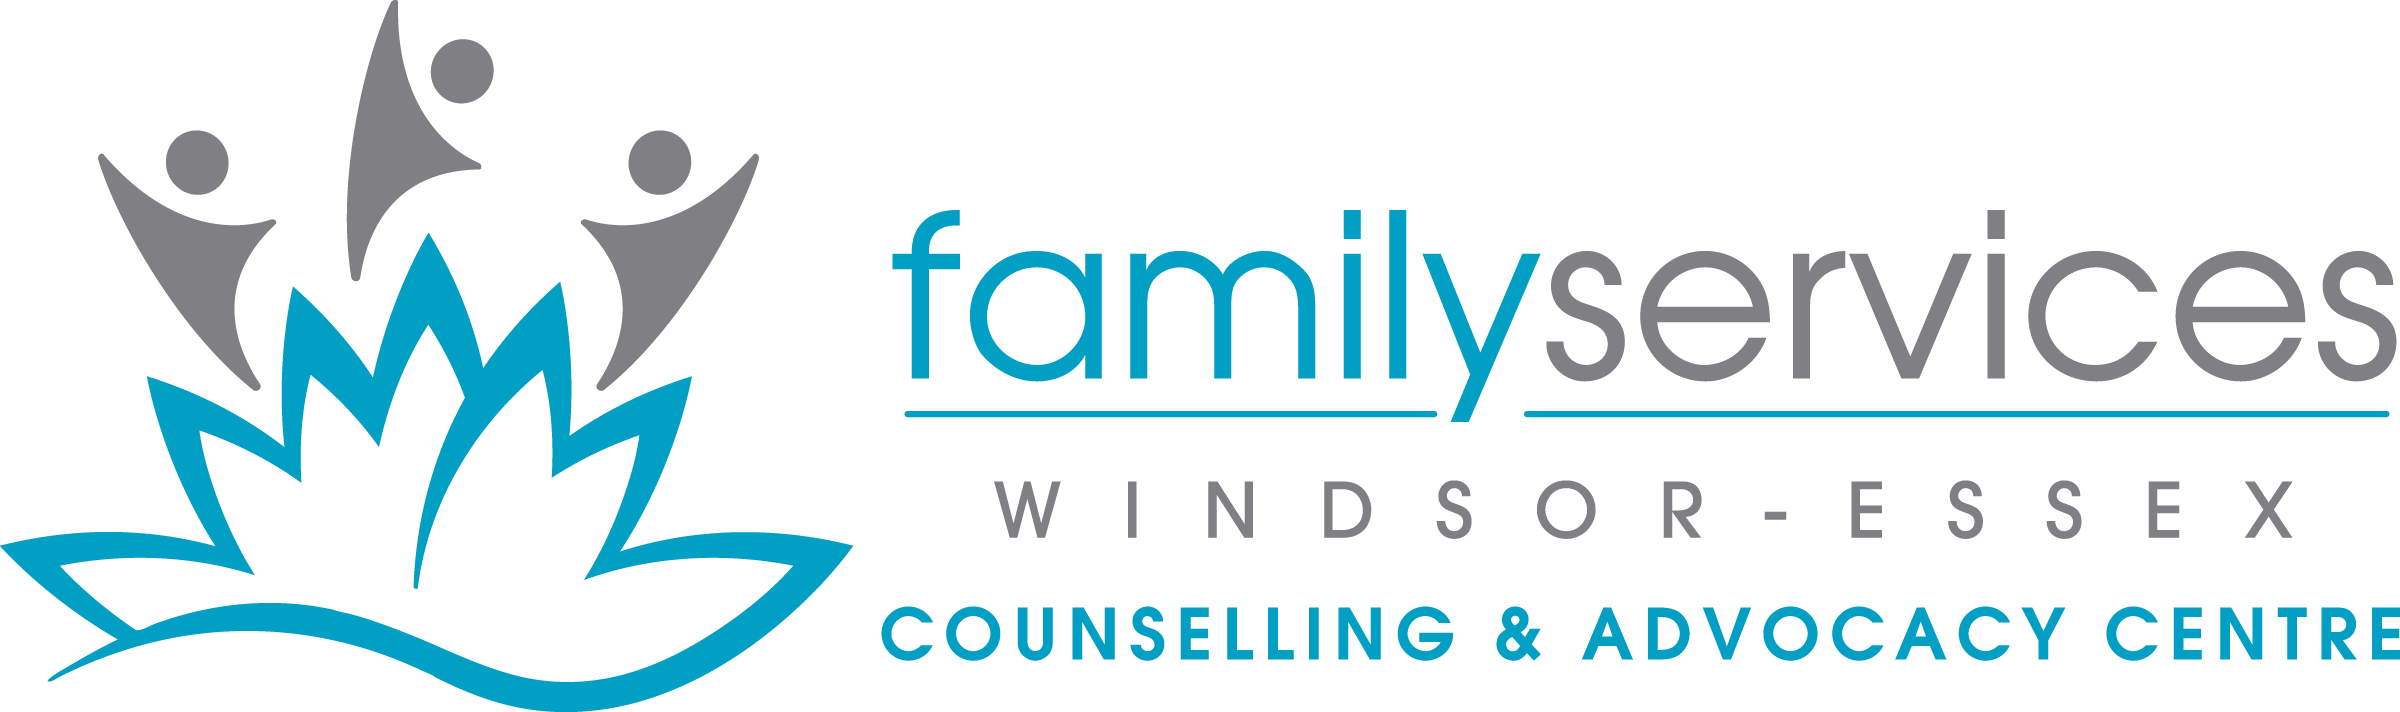 FSWE - Counselling & Advocacy Centre